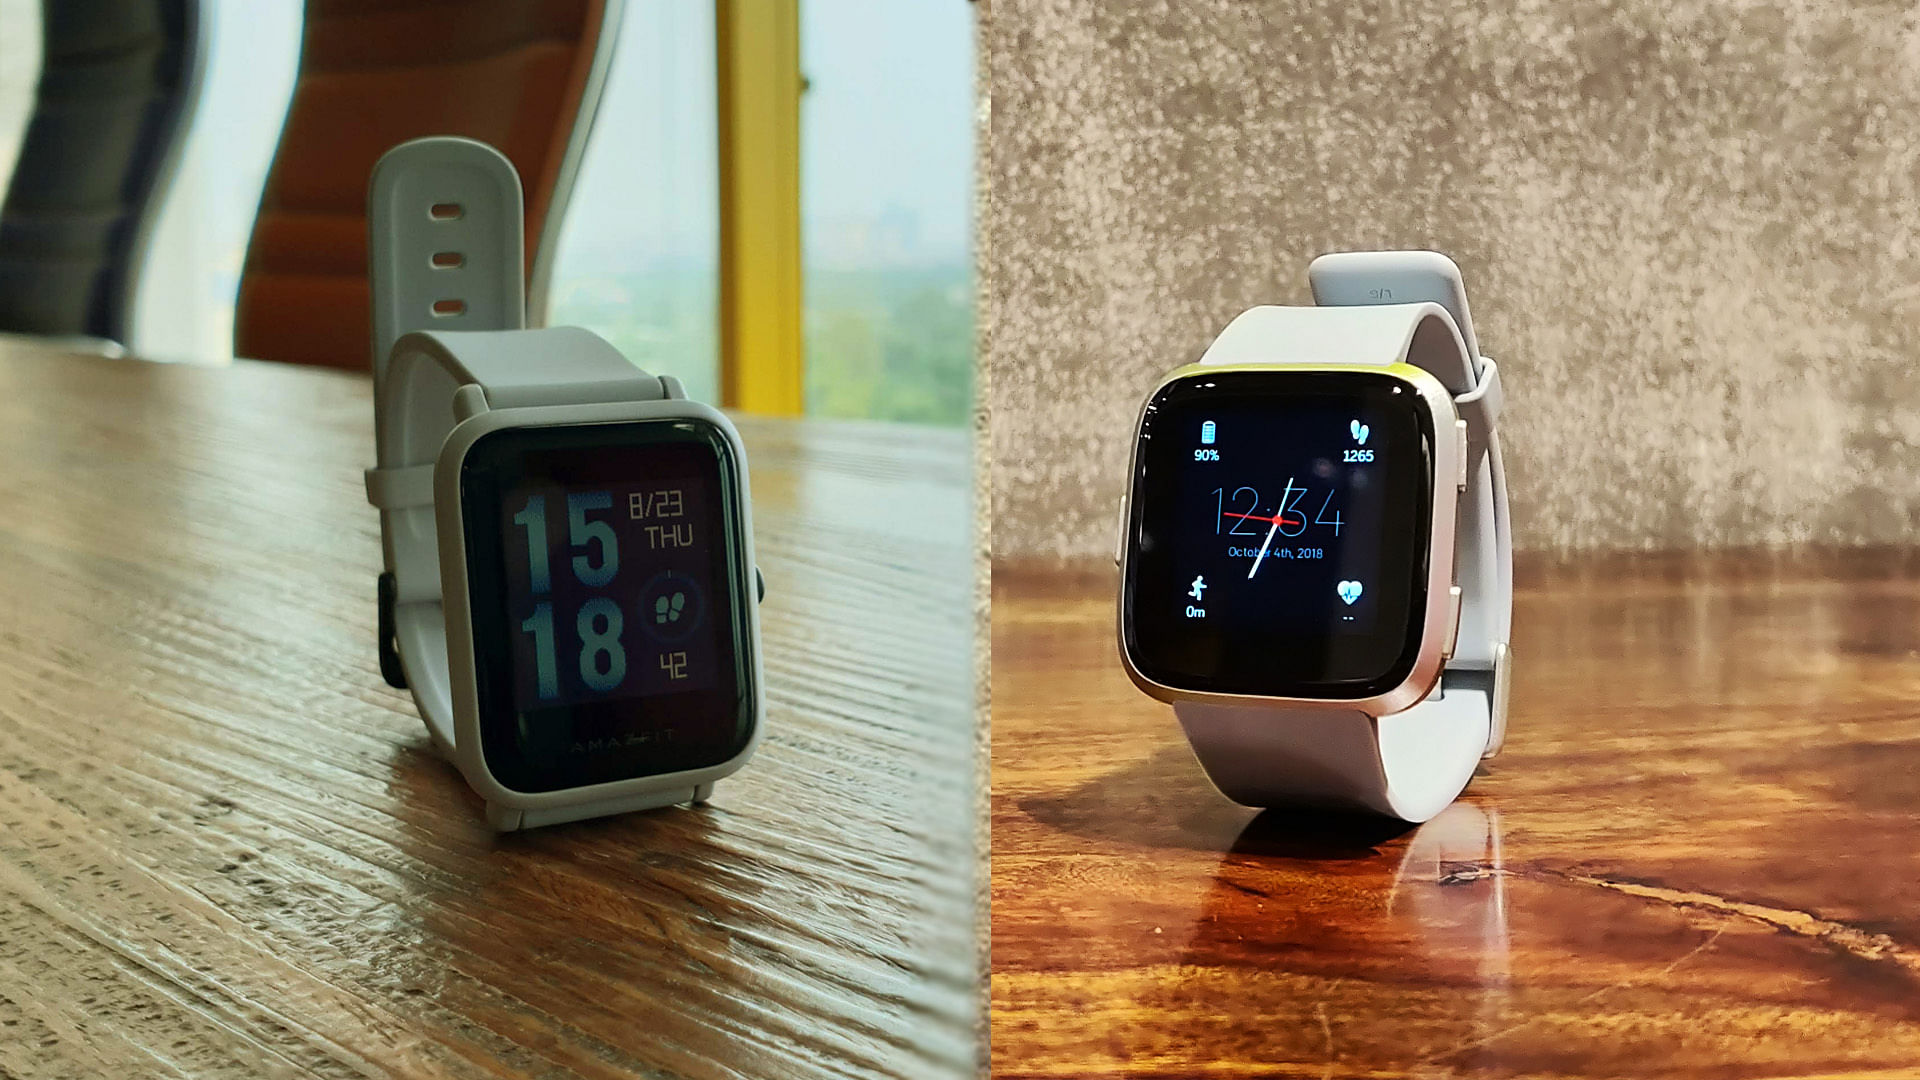 The Amazfit Bip (left) and Fitbit Versa (right).